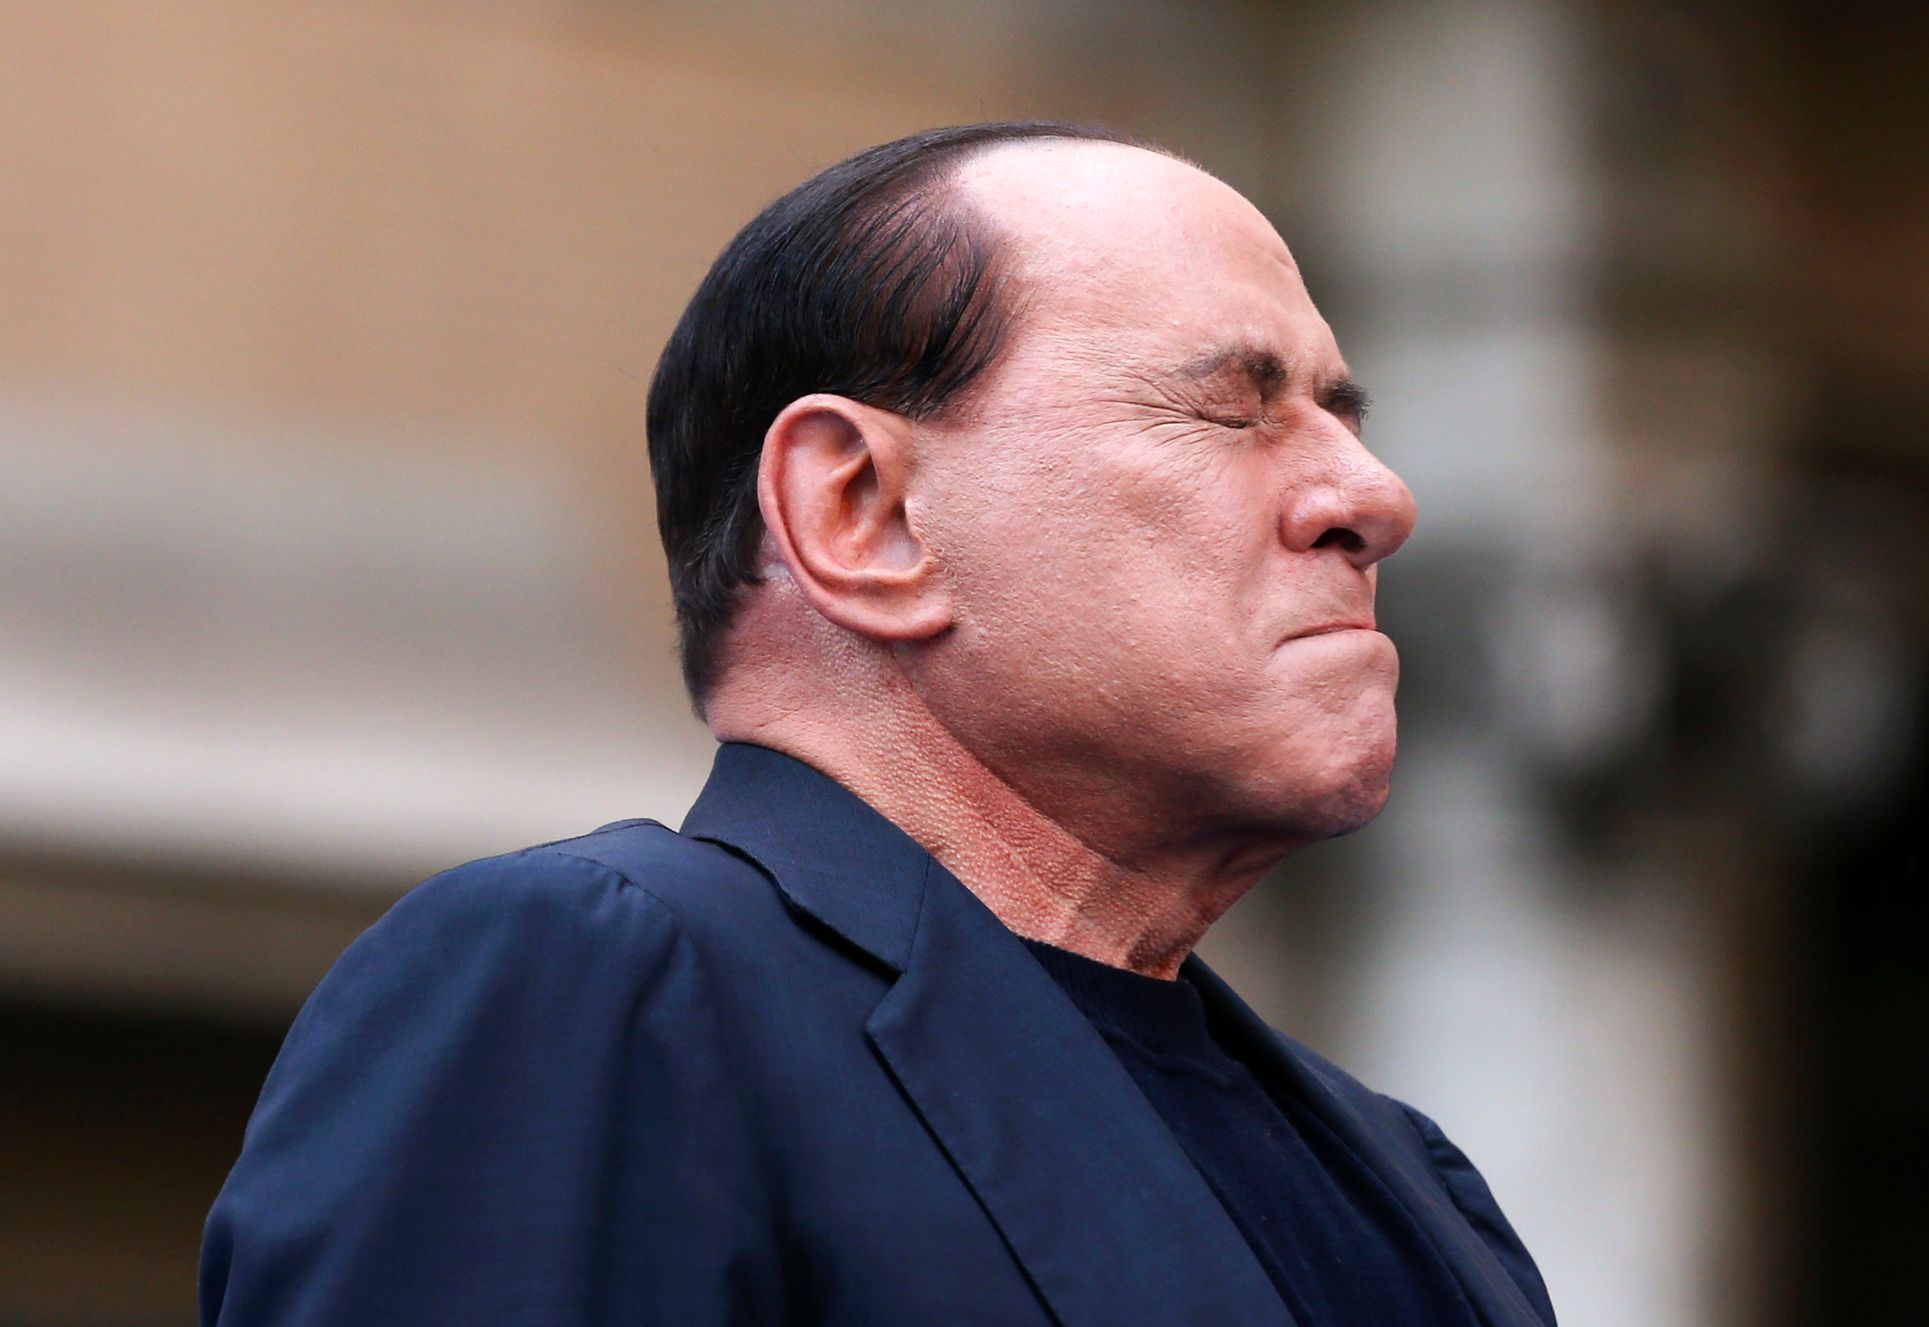 File photo of Berlusconi closing his eyes in a gesture to supporters during a rally to protest his tax fraud conviction, outside his palace in central Rome